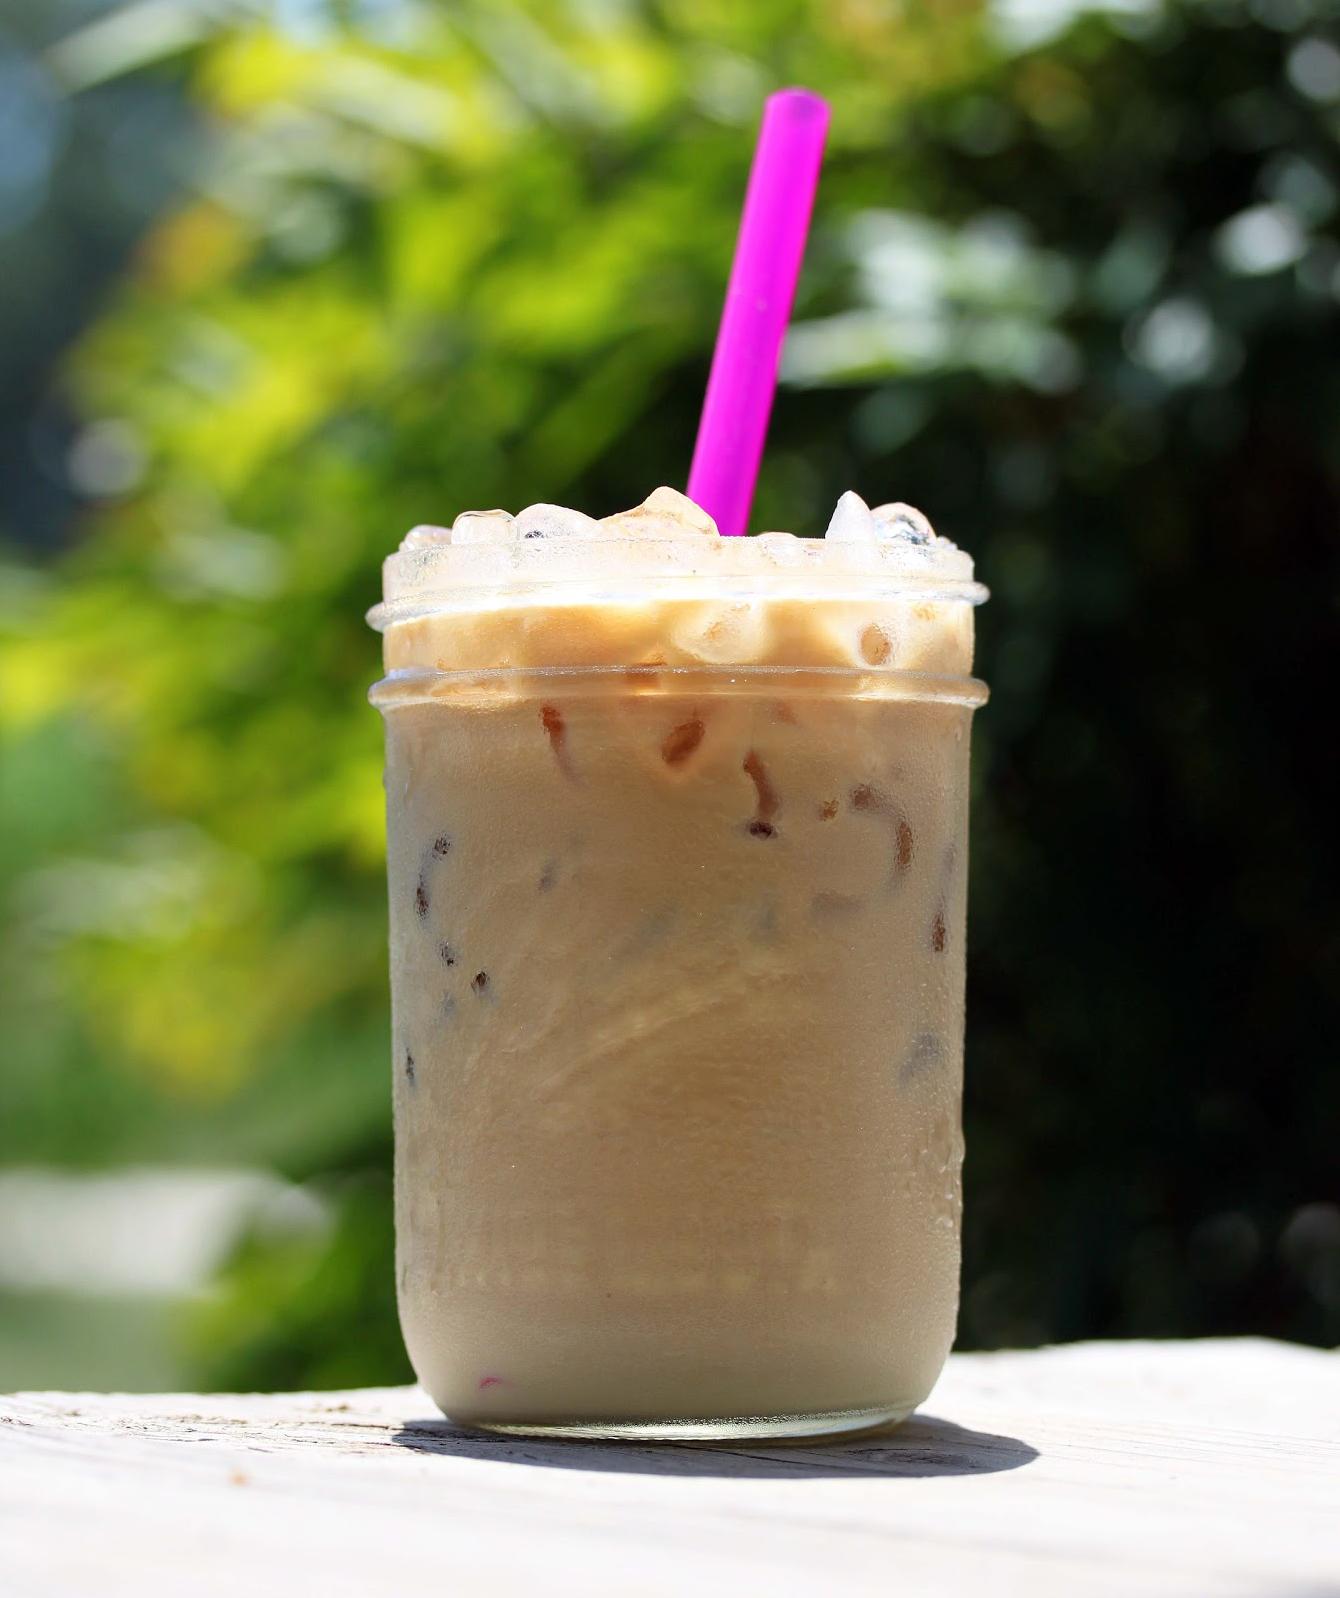  Iced coffee never looked so good.